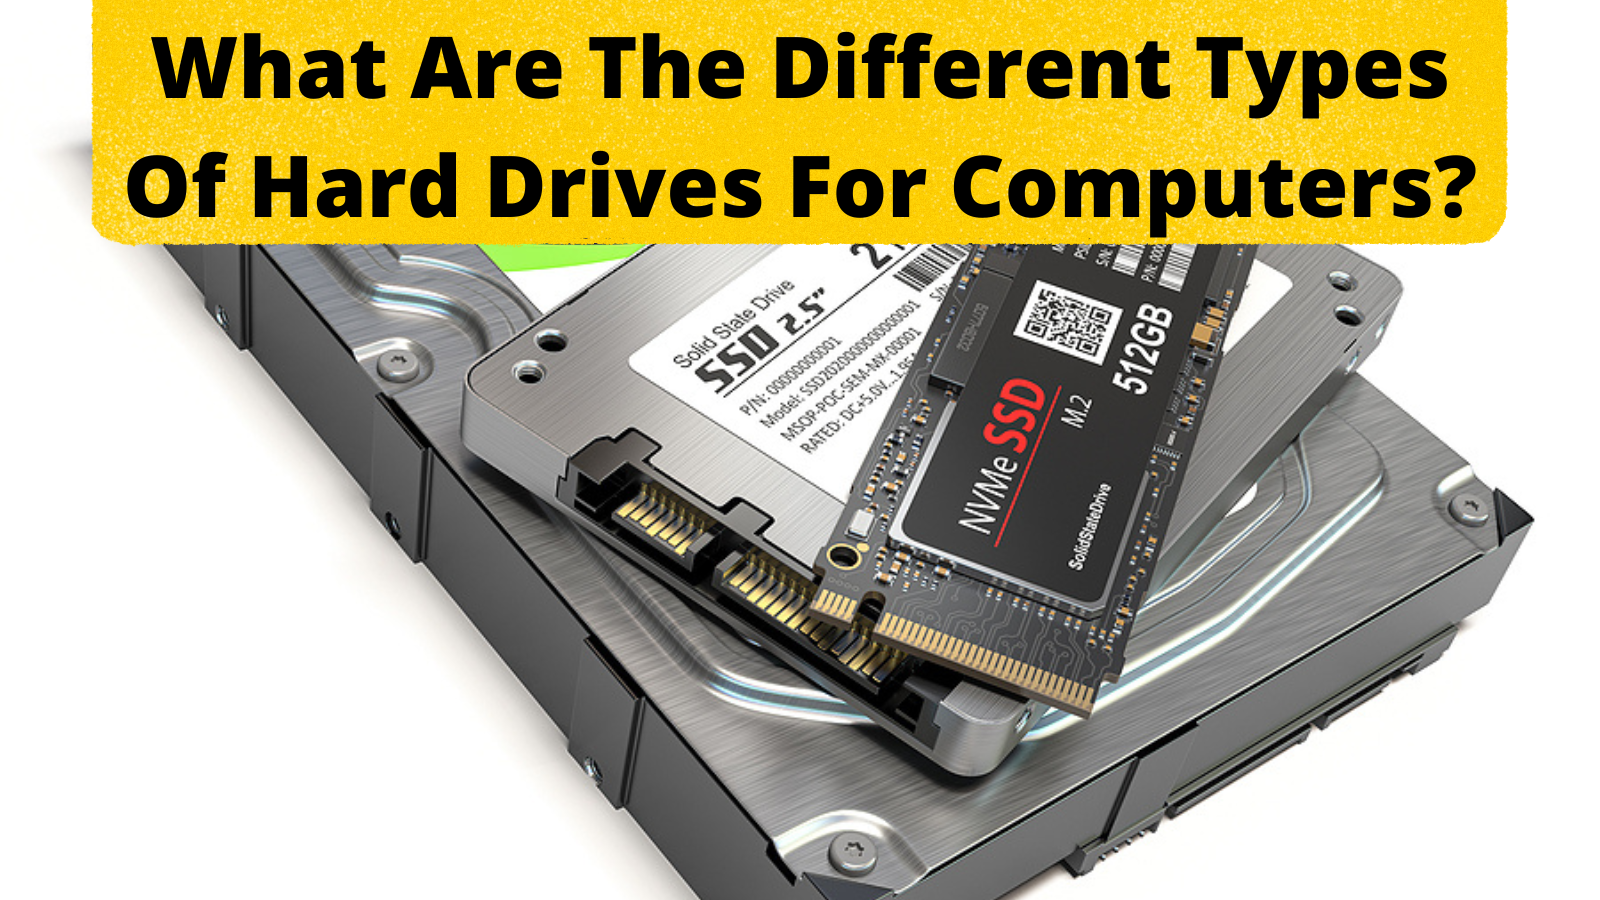 What Are The Different Types Of Hard Drives For Computers